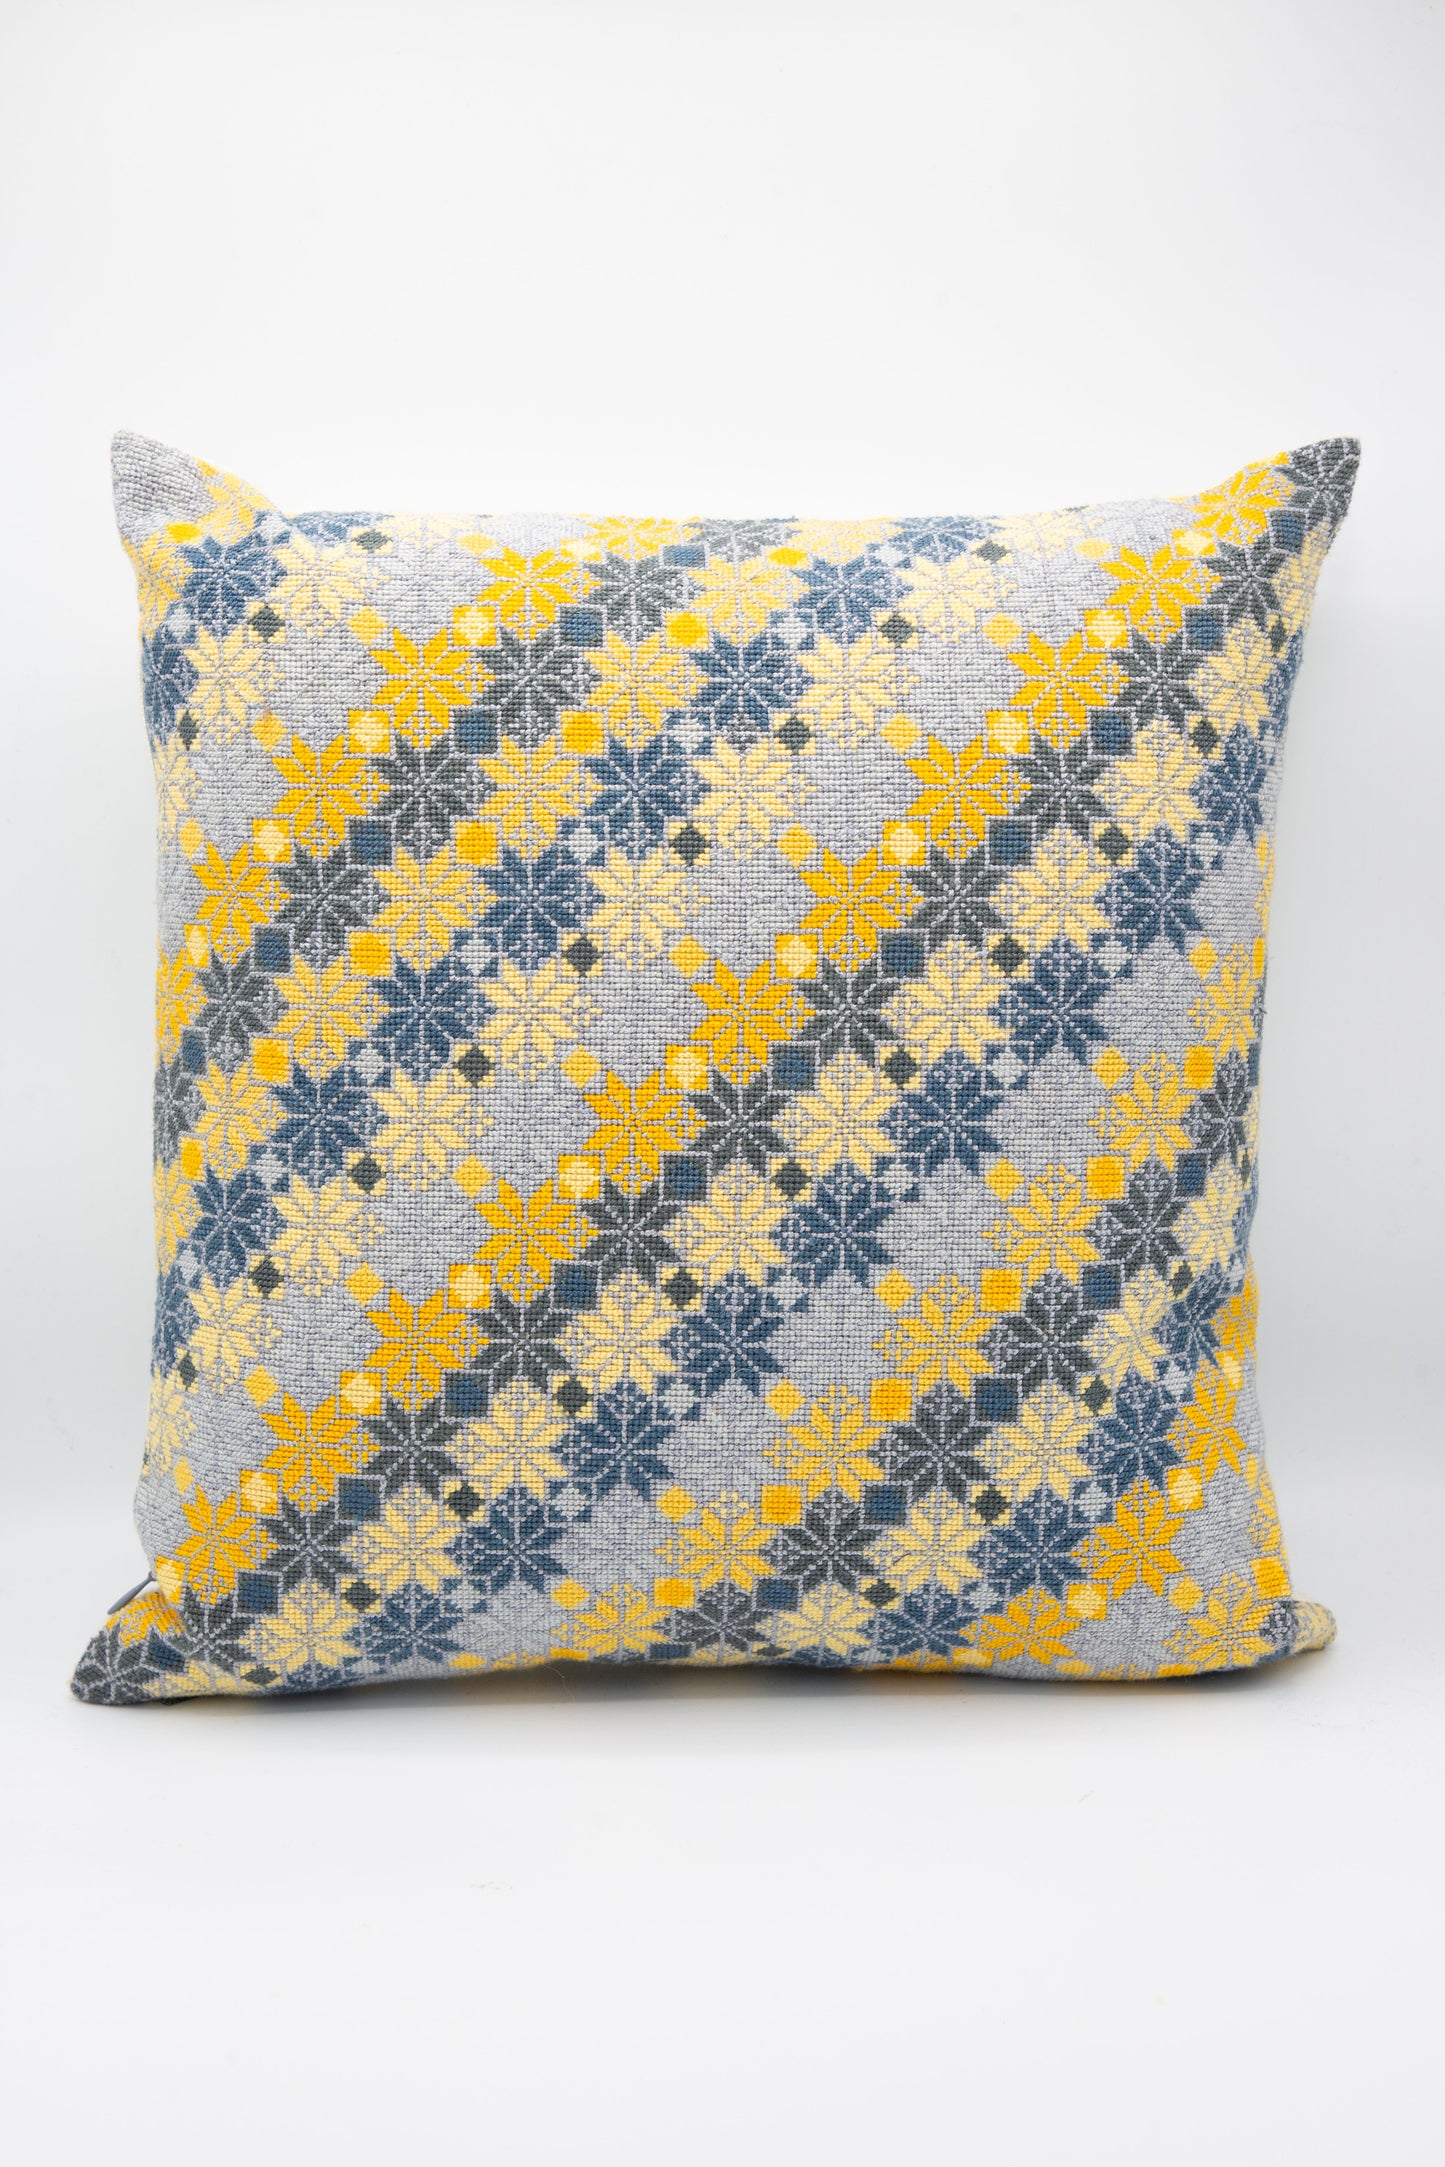 A Moon of Bethlehem Hand Embroidered Pillow in Slate and Lemon by Kissweh with a floral pattern.